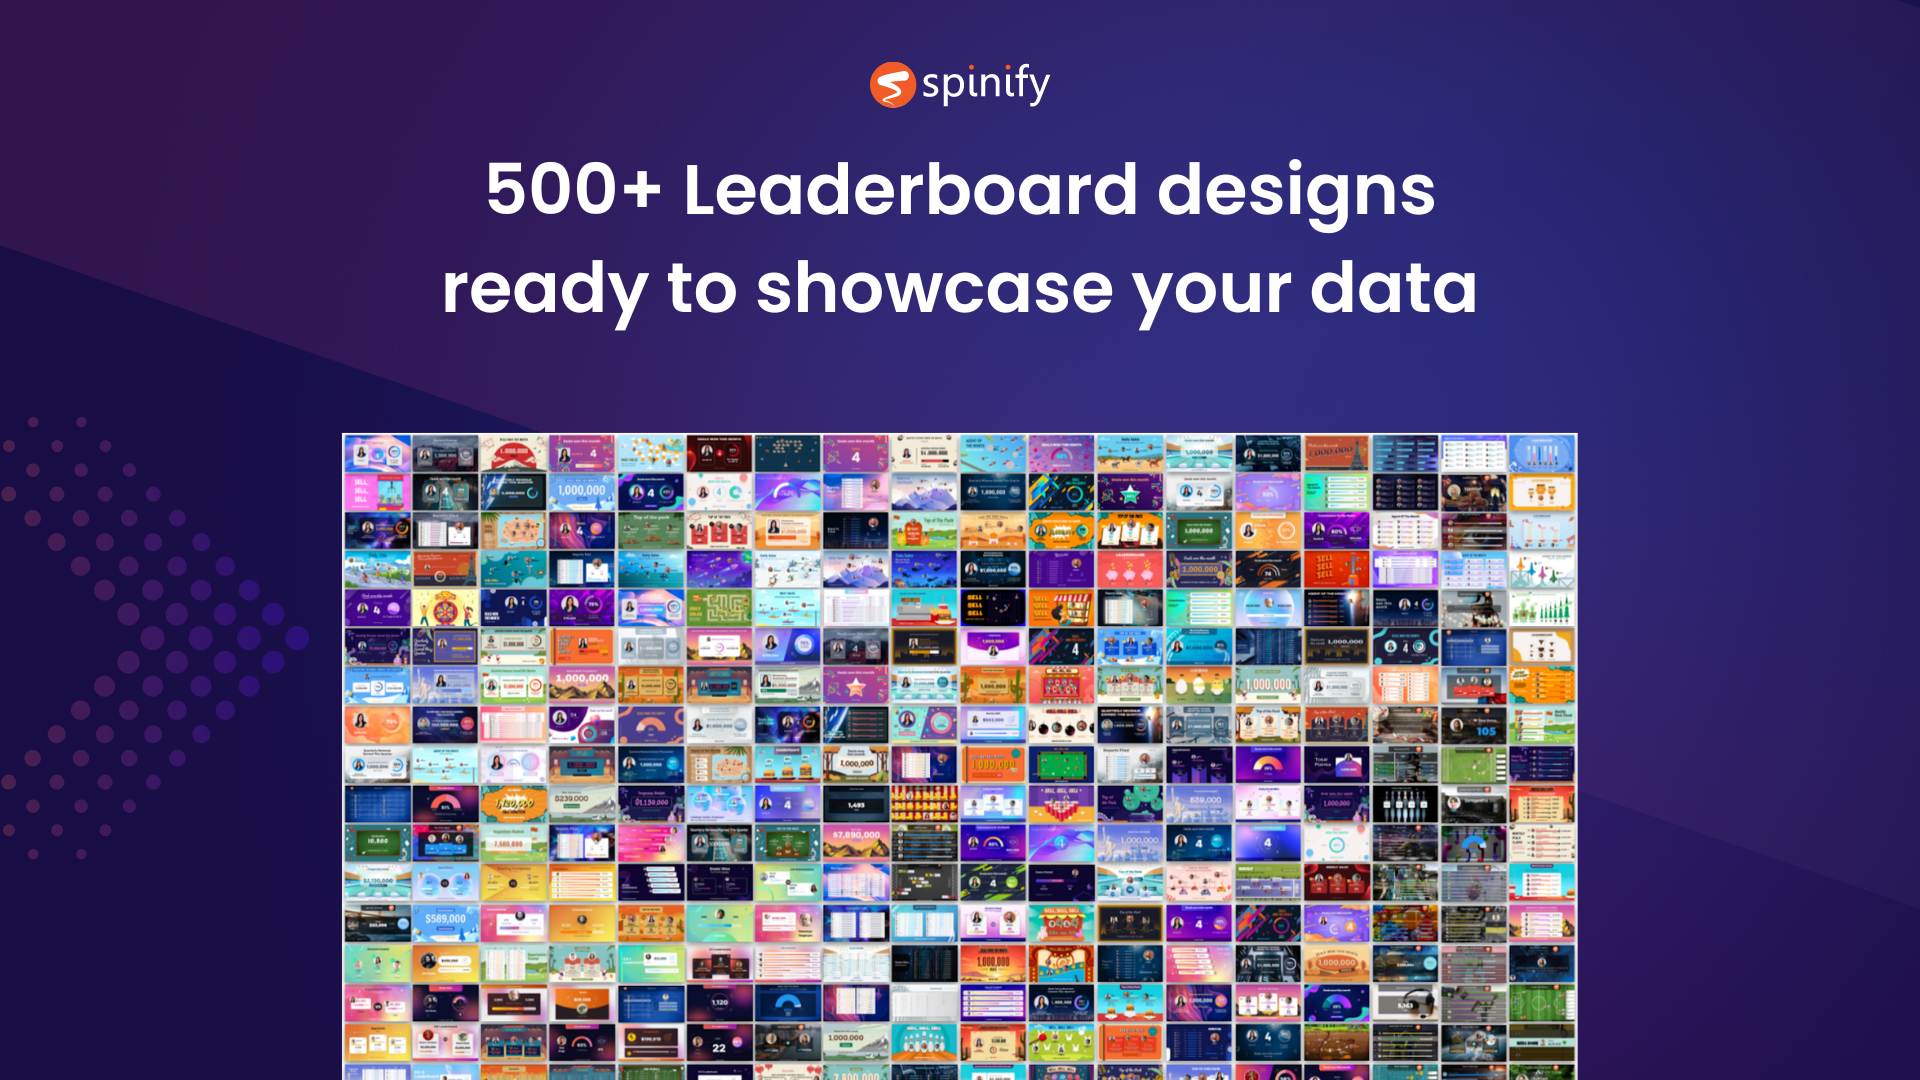 500+ Leaderboard designs ready to showcase your data